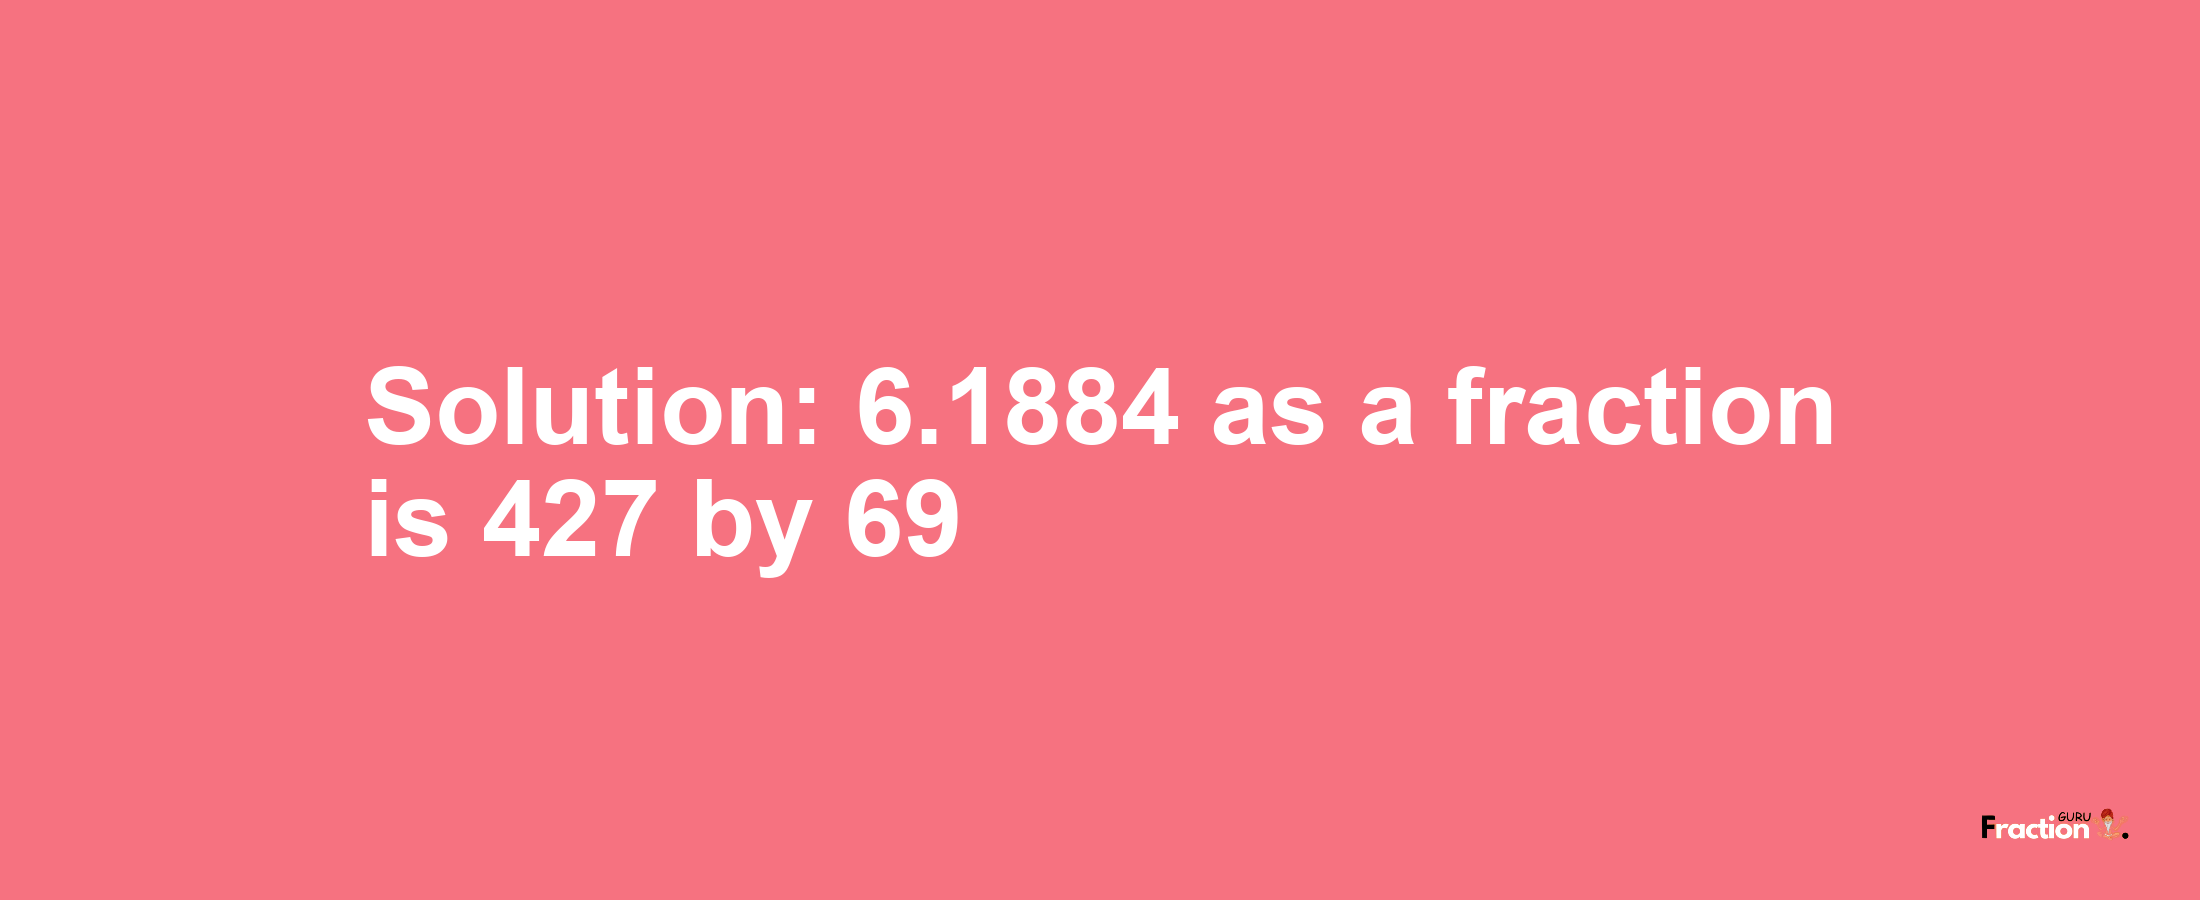 Solution:6.1884 as a fraction is 427/69